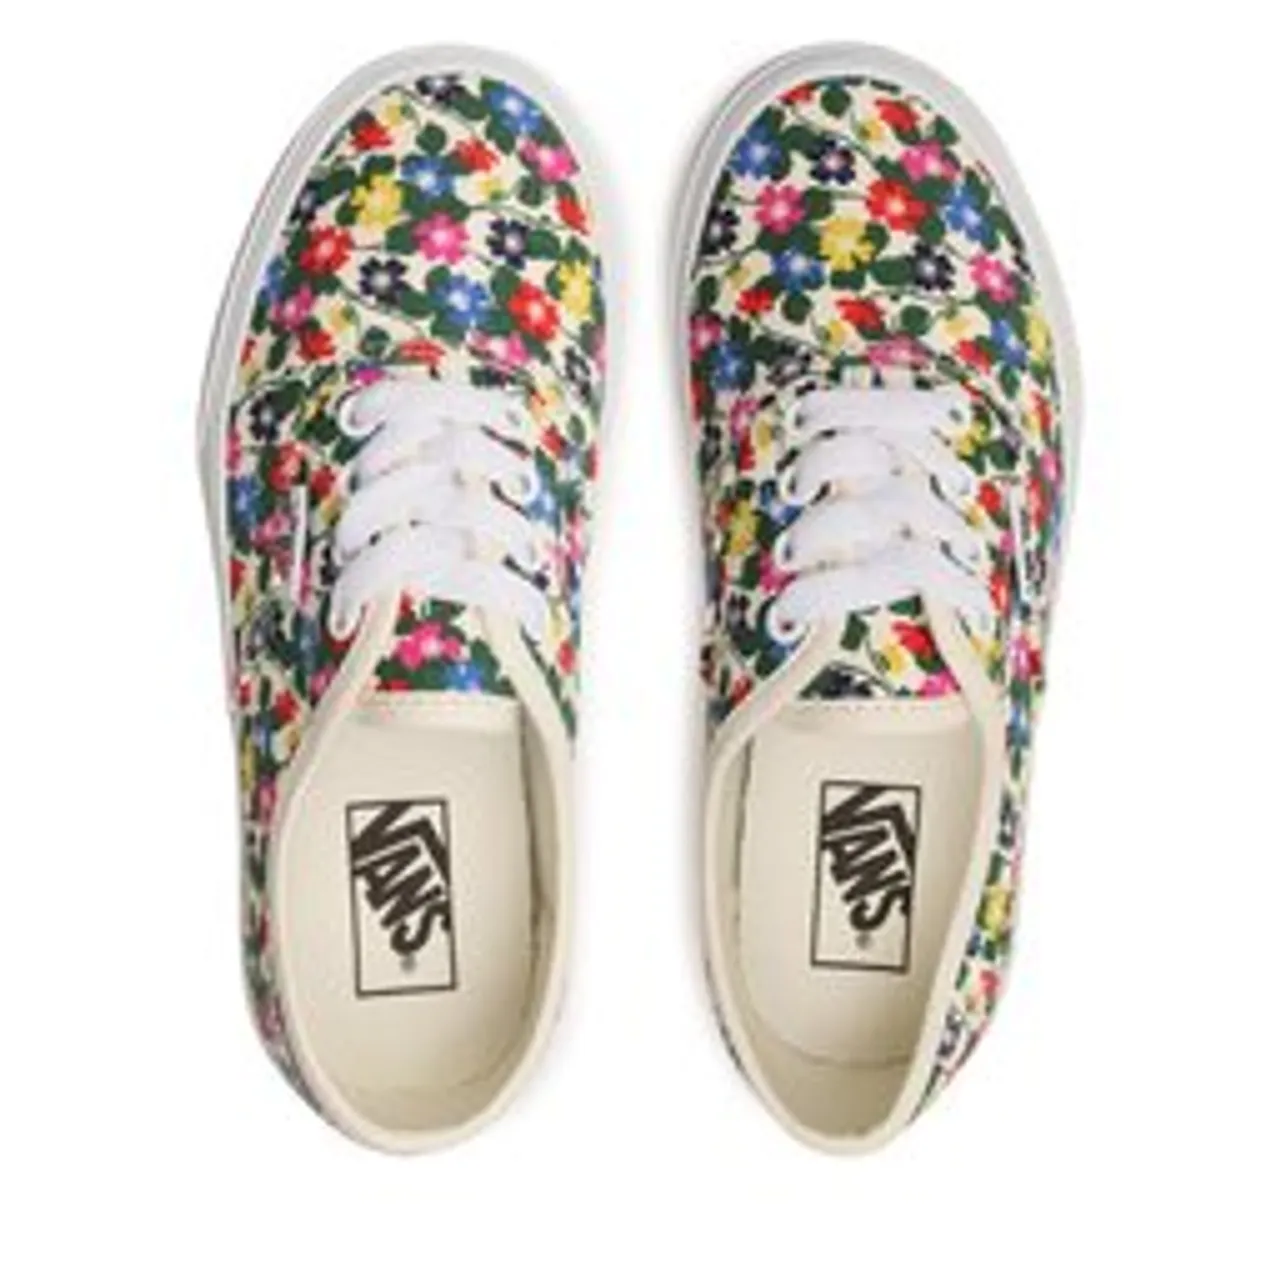 Sneakers aus Stoff Vans Authentic VN000WWXWHT1 Floral White